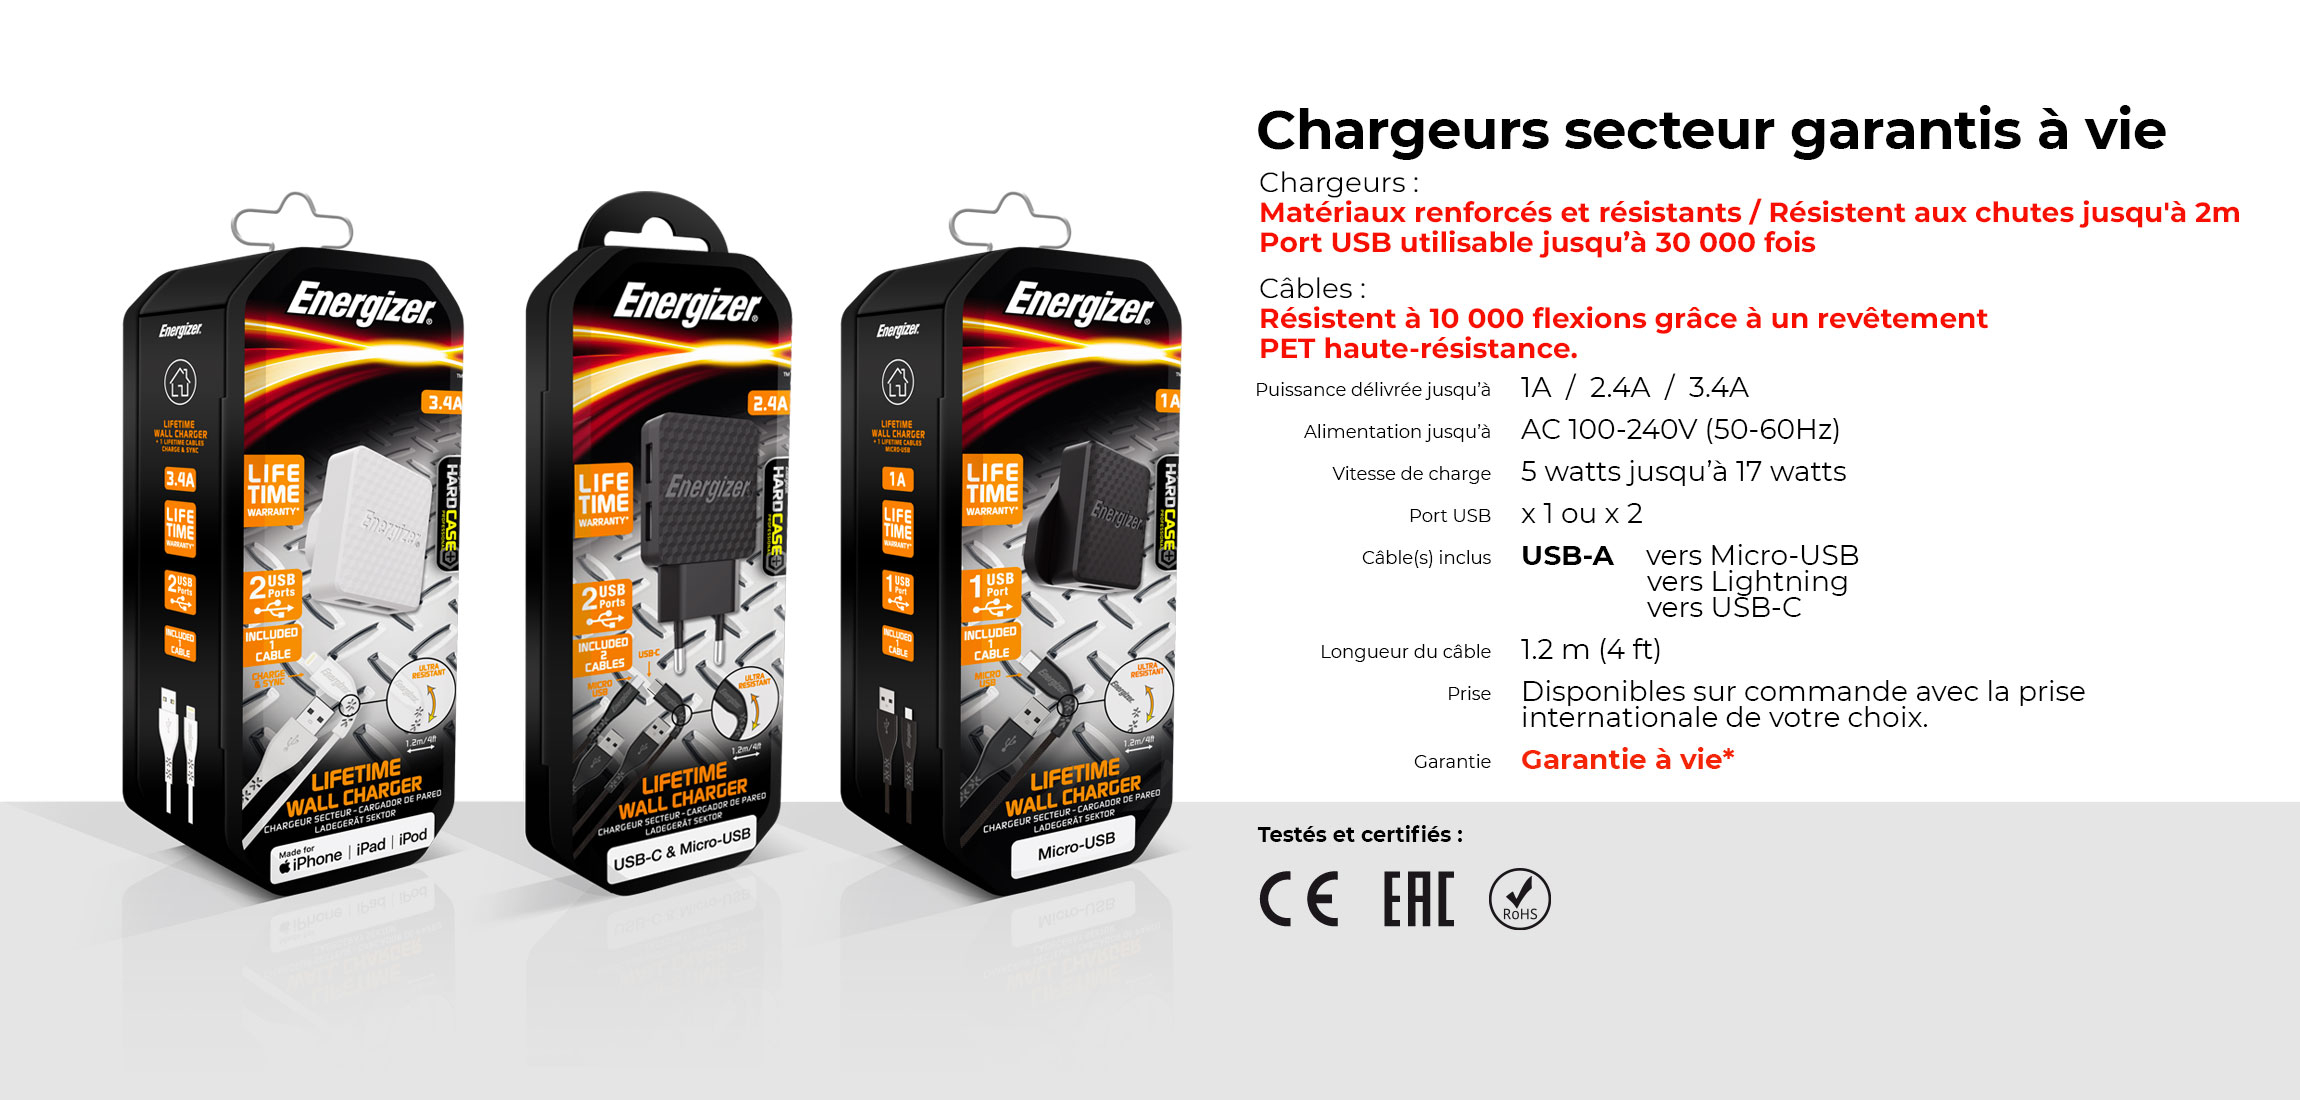 AT-wall-chargers-LIFE-pack-FR.jpg